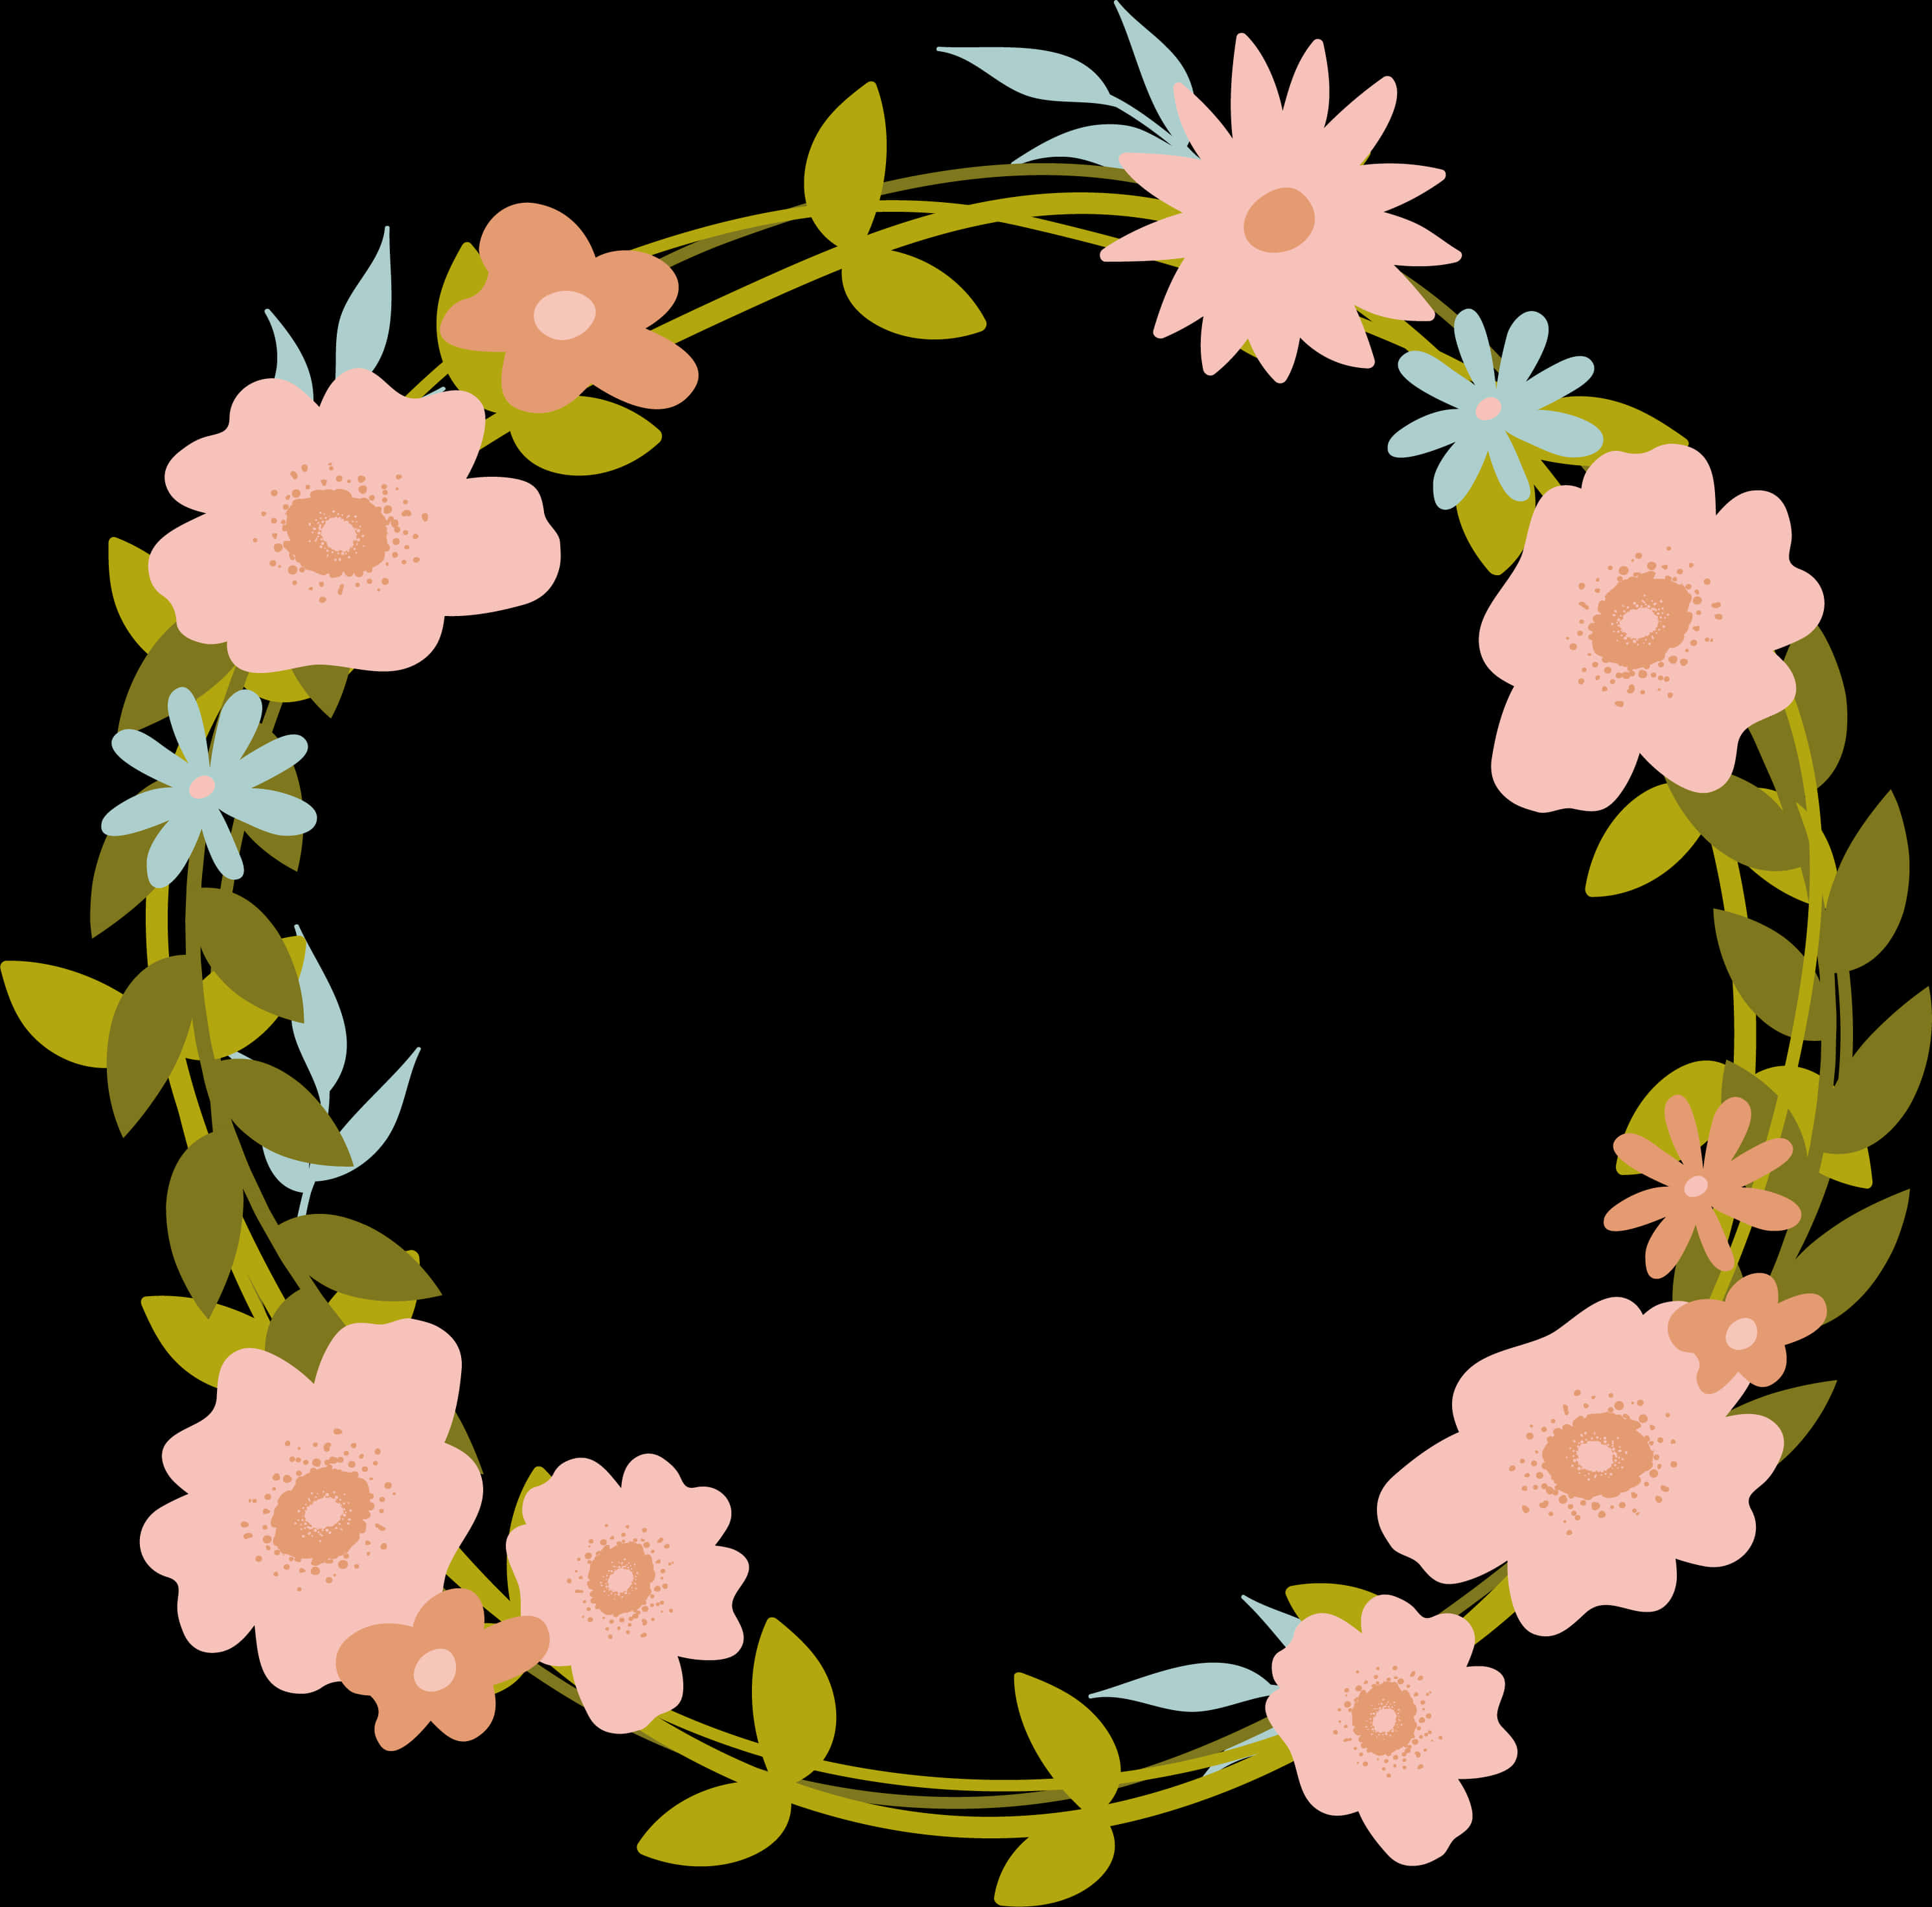 Floral Wreath Graphic Design PNG